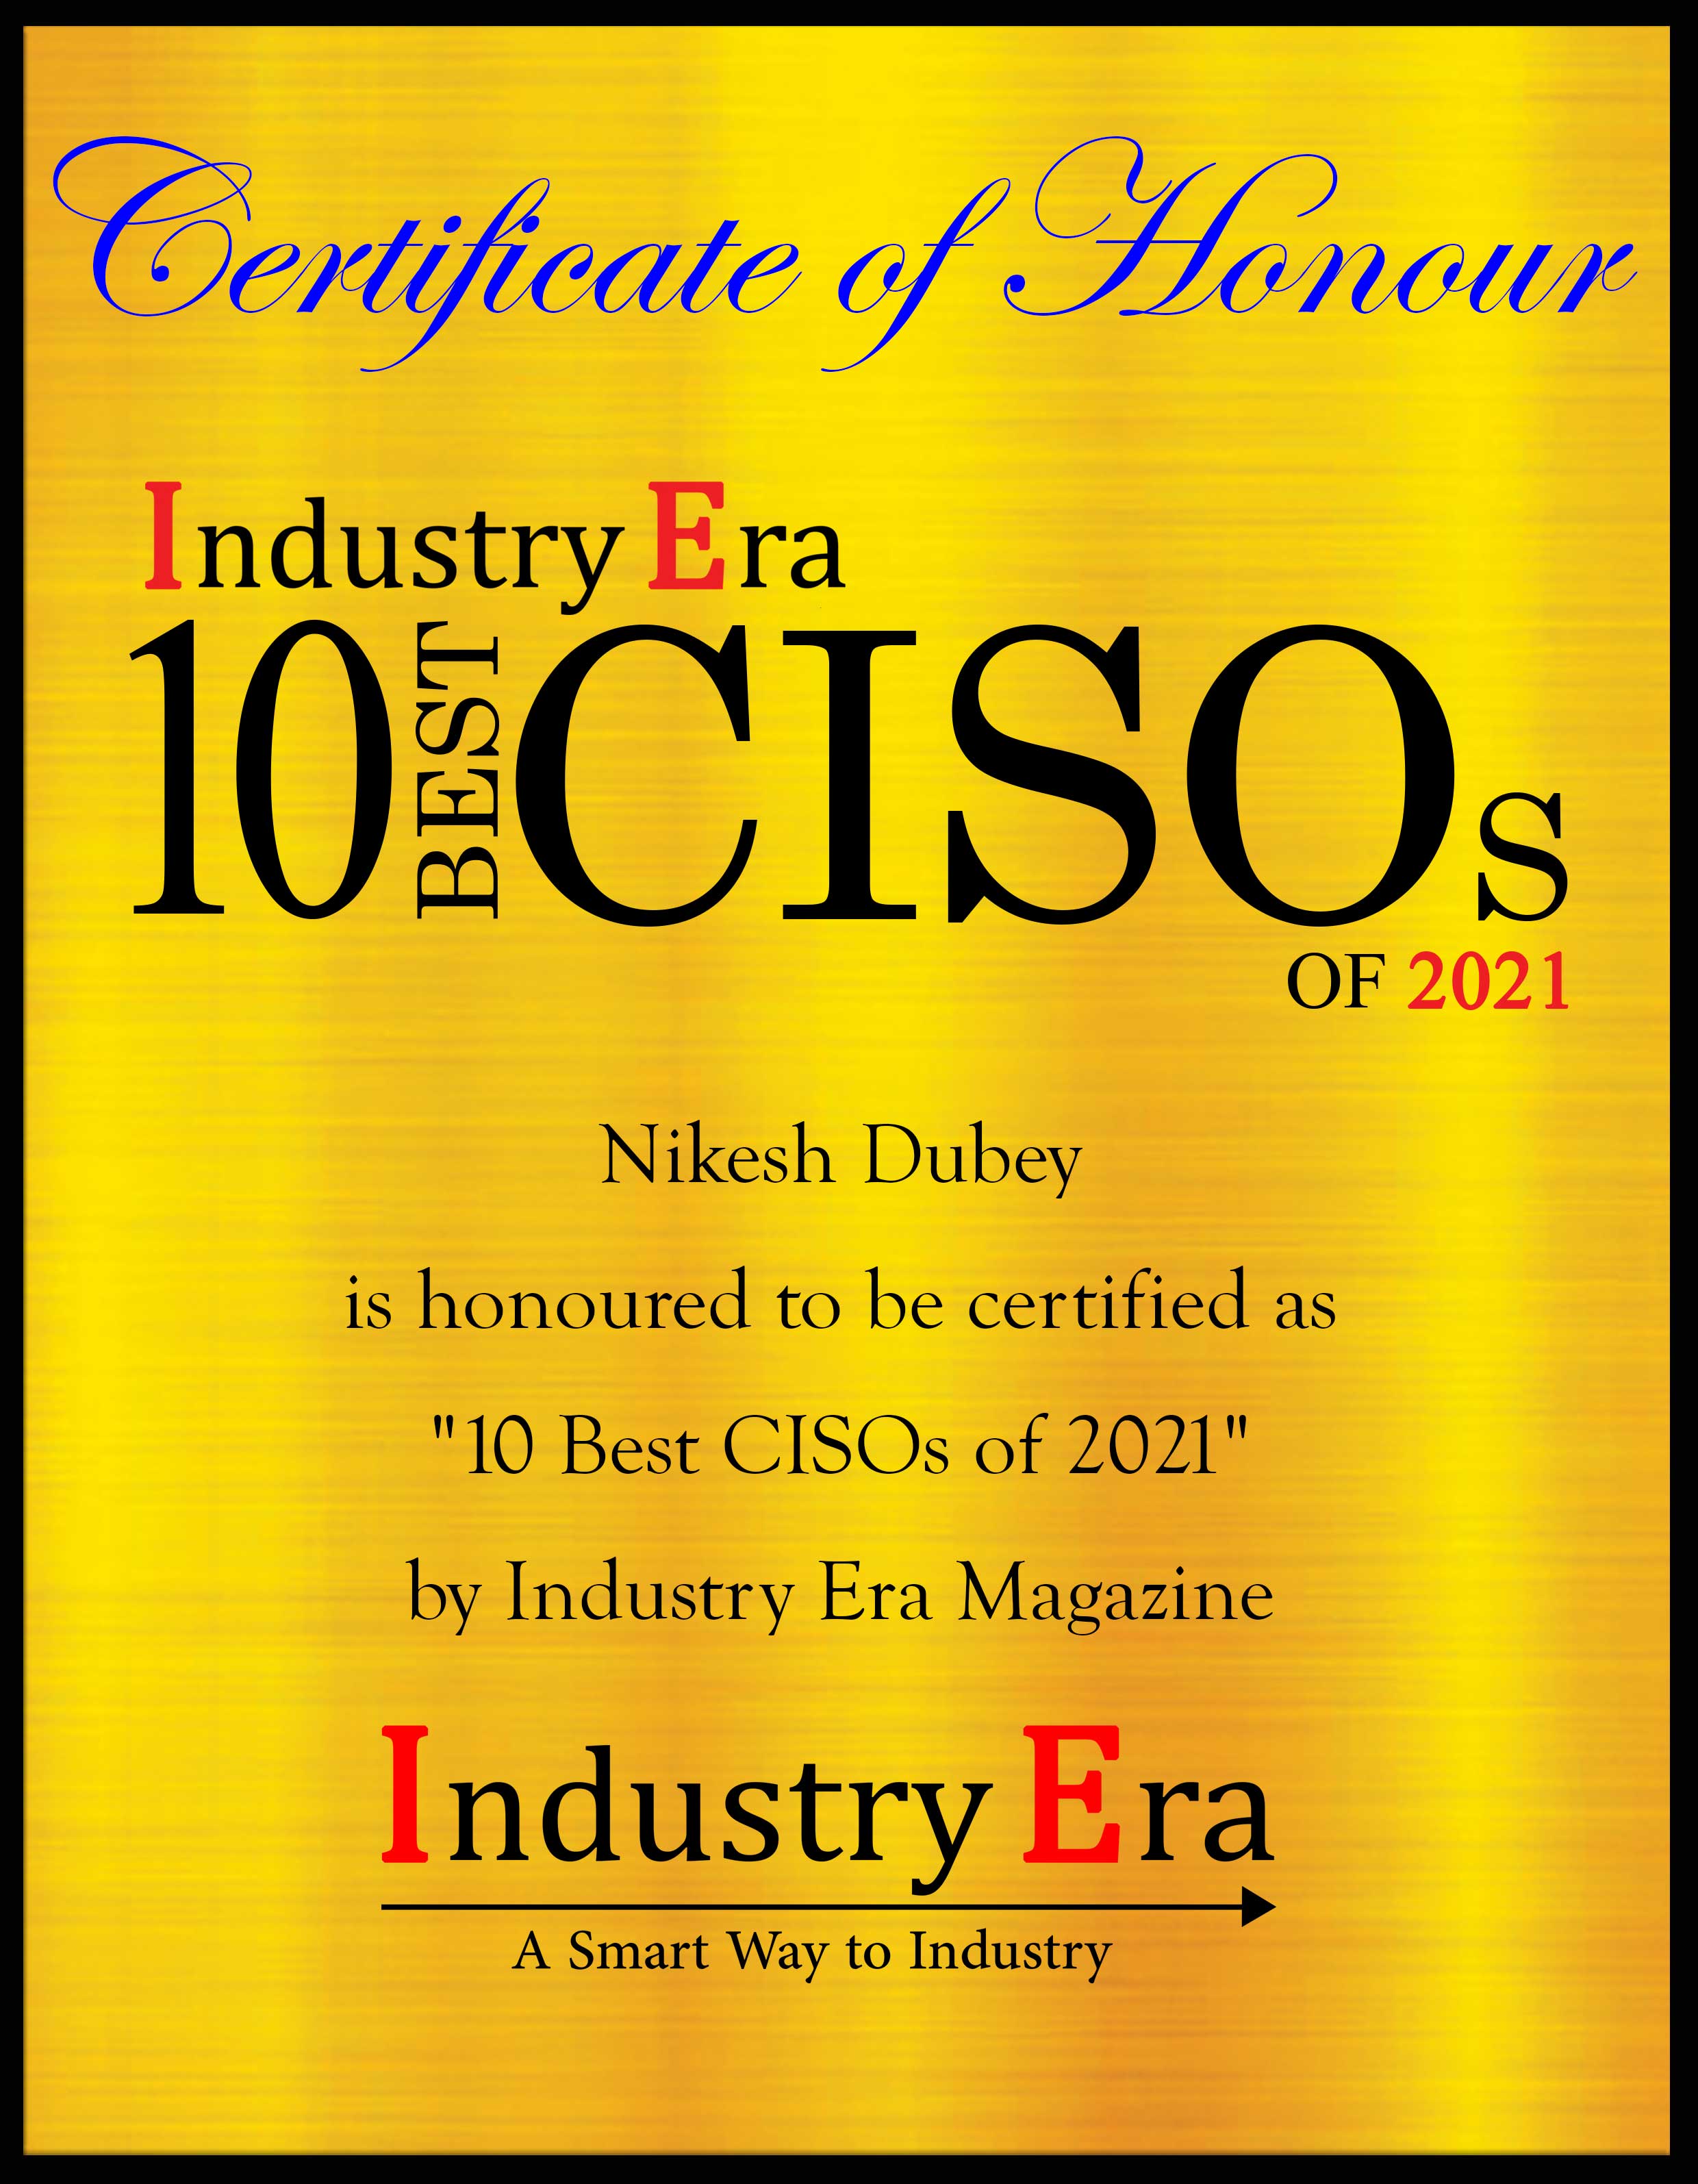 Nikesh Dubey, Chief Information Security Officer of Black Box Certificate